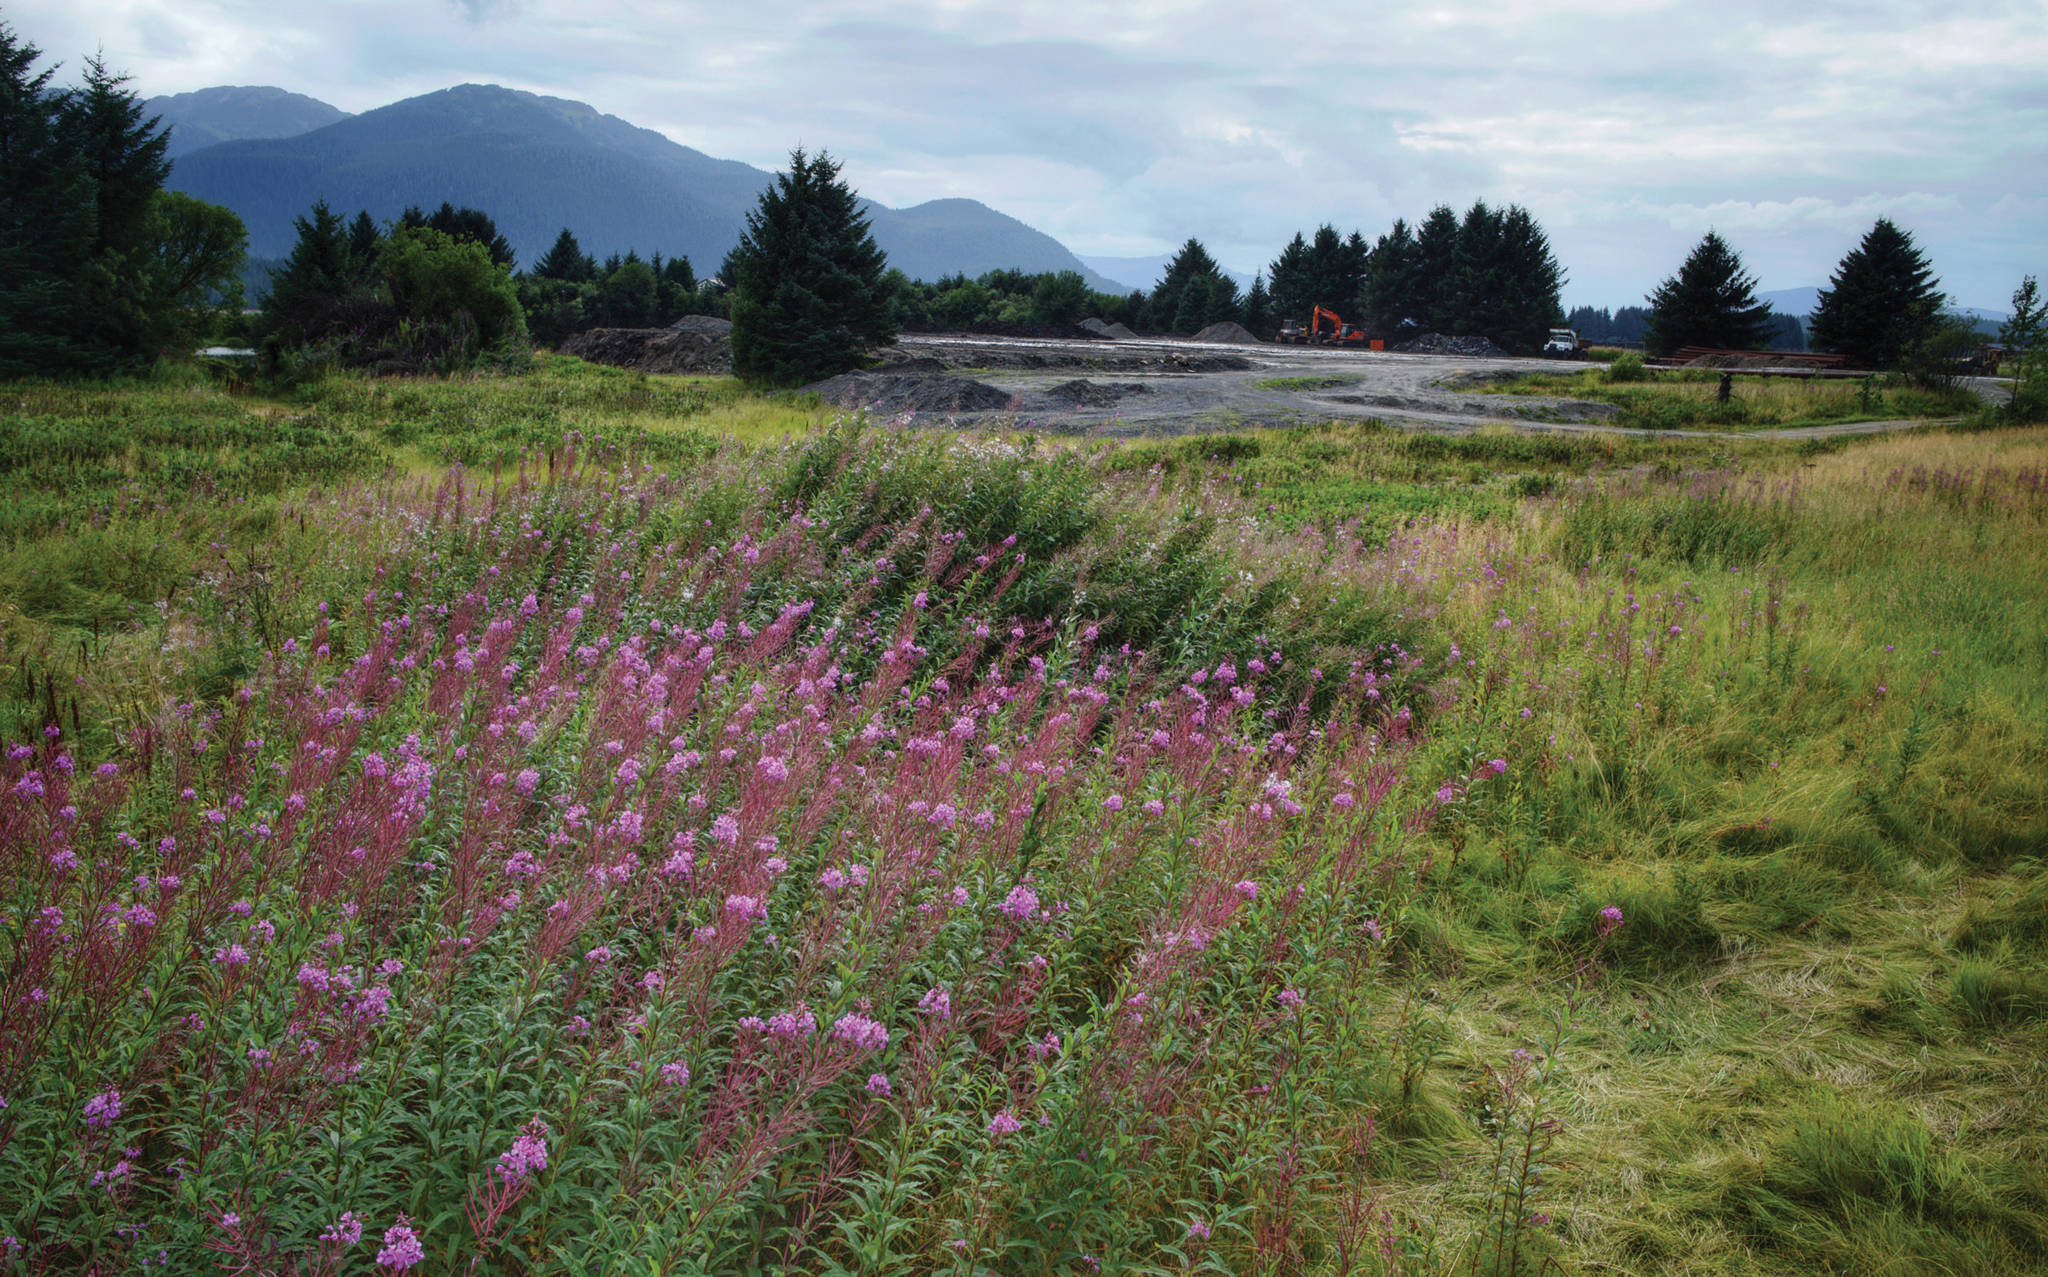 The field owned by Bicknell Inc. next to the Juneau International Airport on Wednesday, August 15, 2018. (Michael Penn | Juneau Empire)